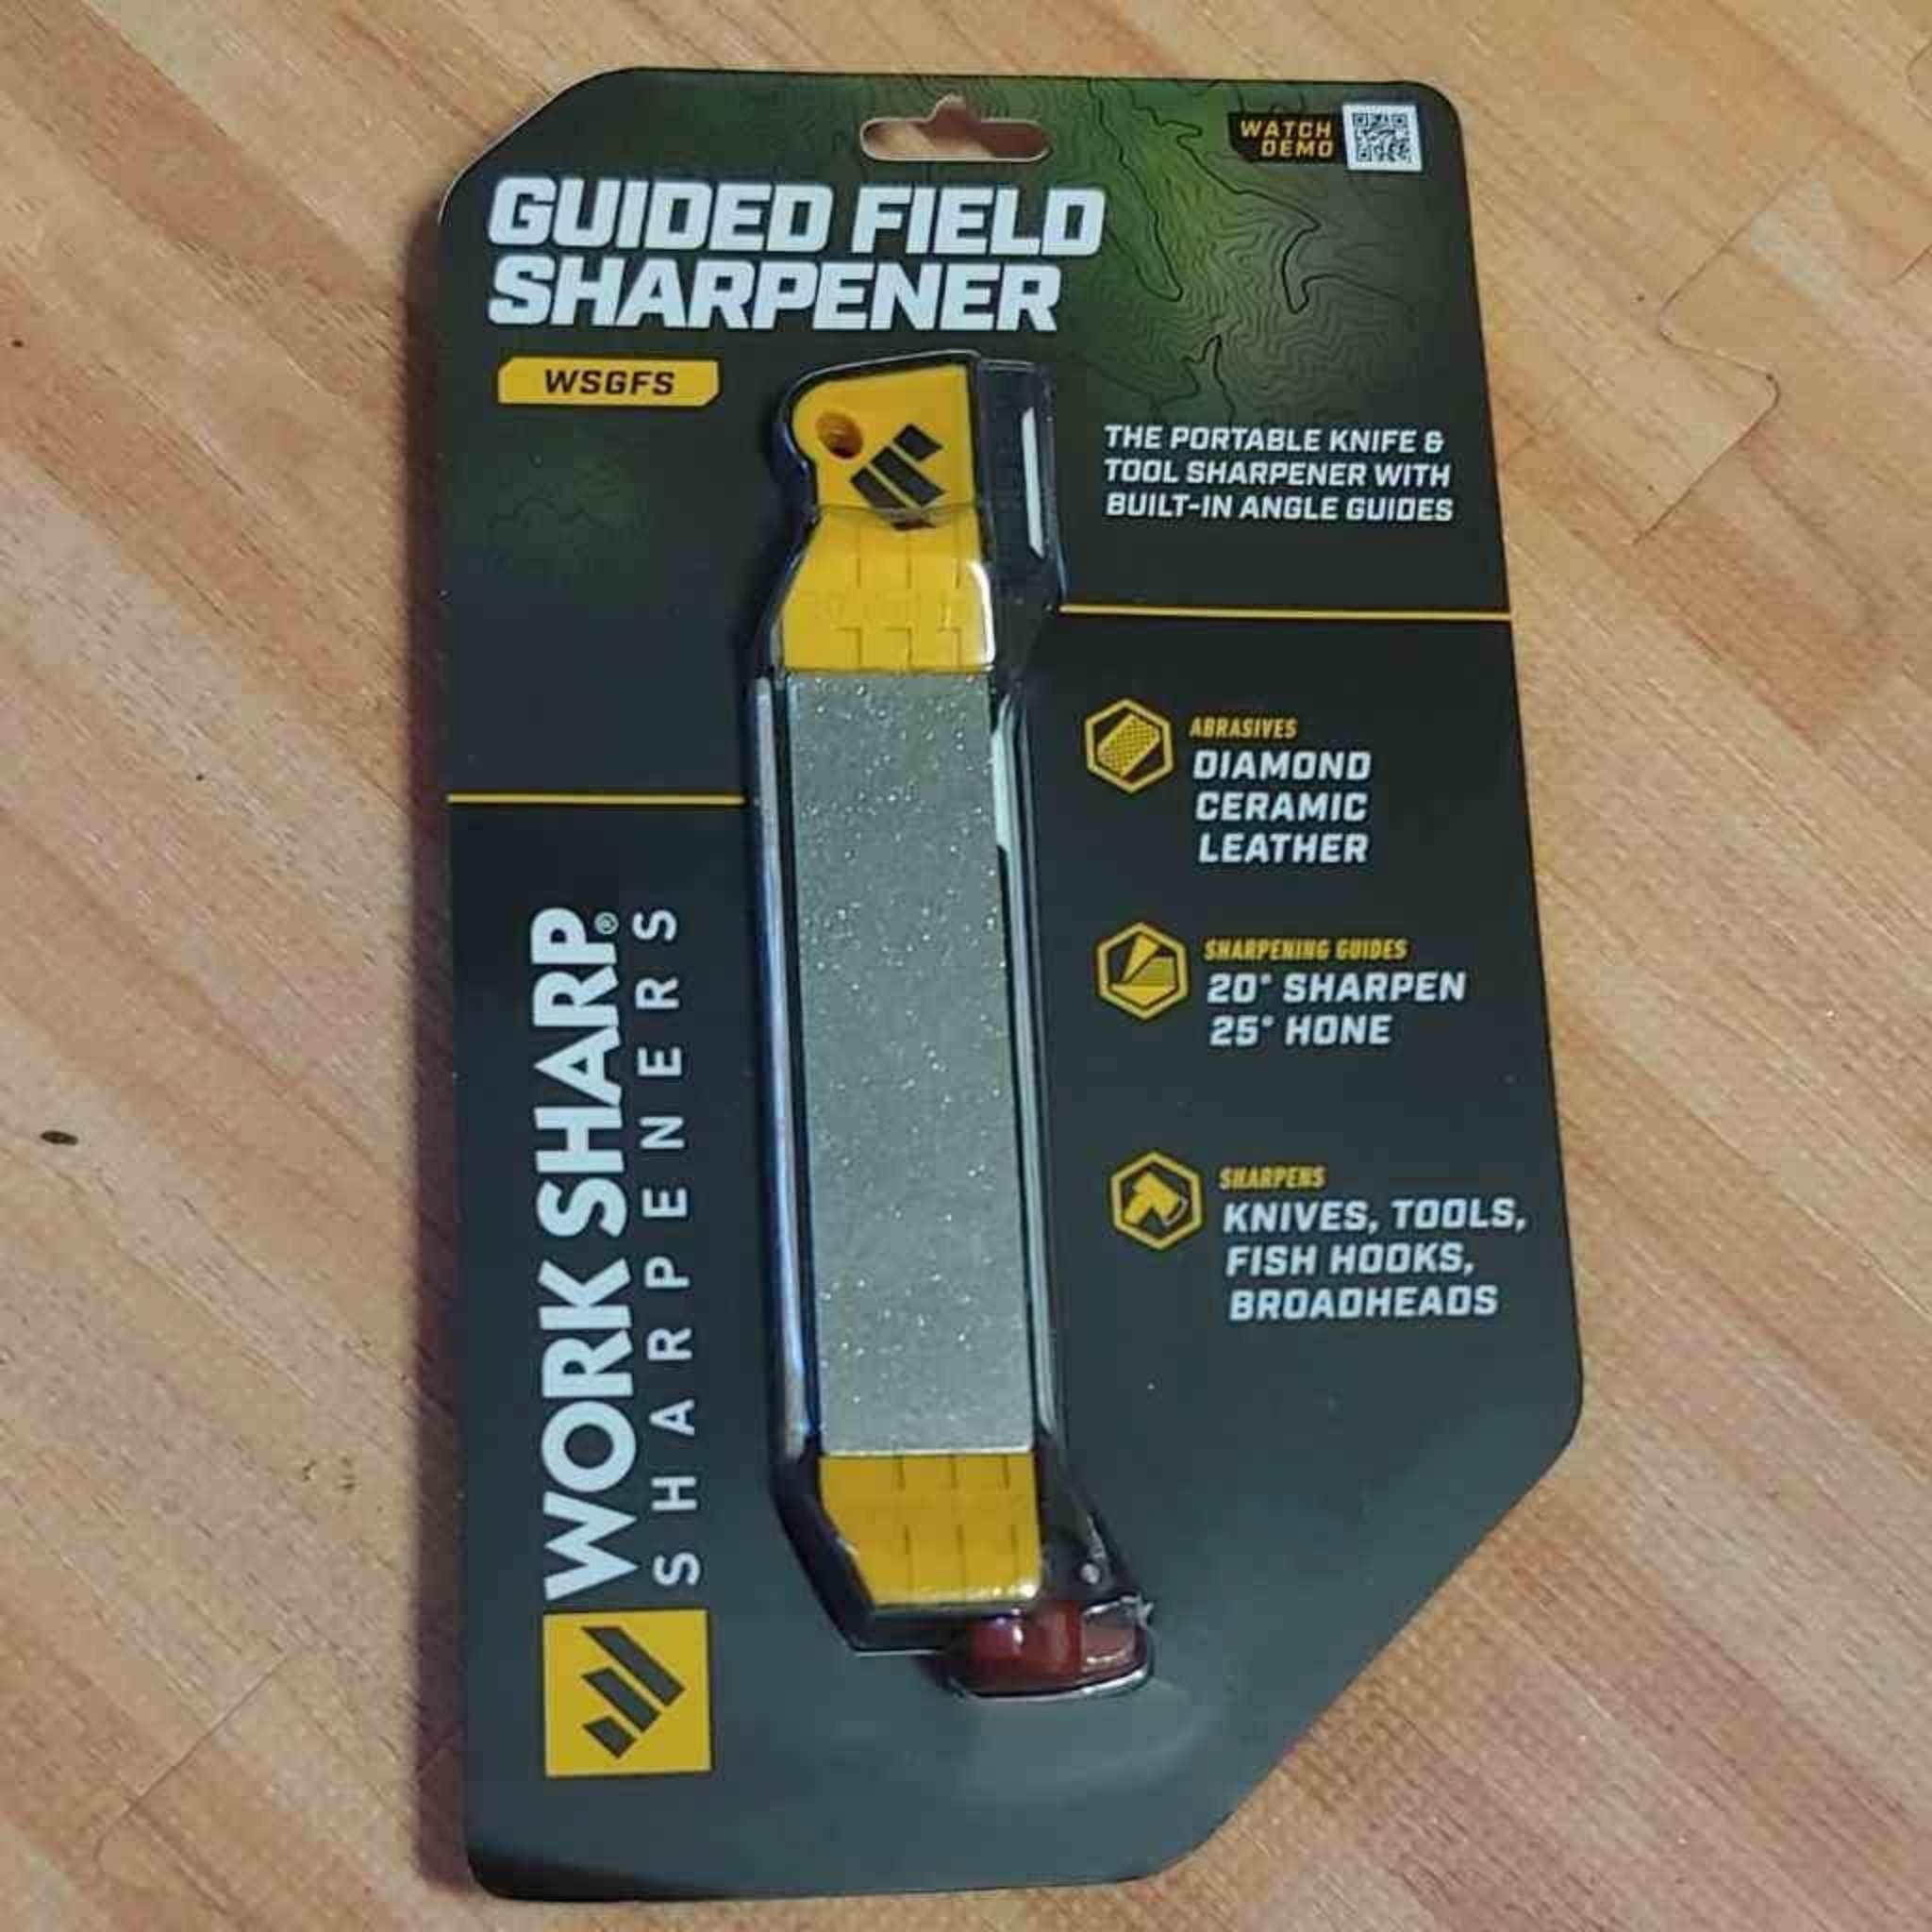 How To Sharpen A Knife In The Field, Work Sharp Guided Field Sharpener